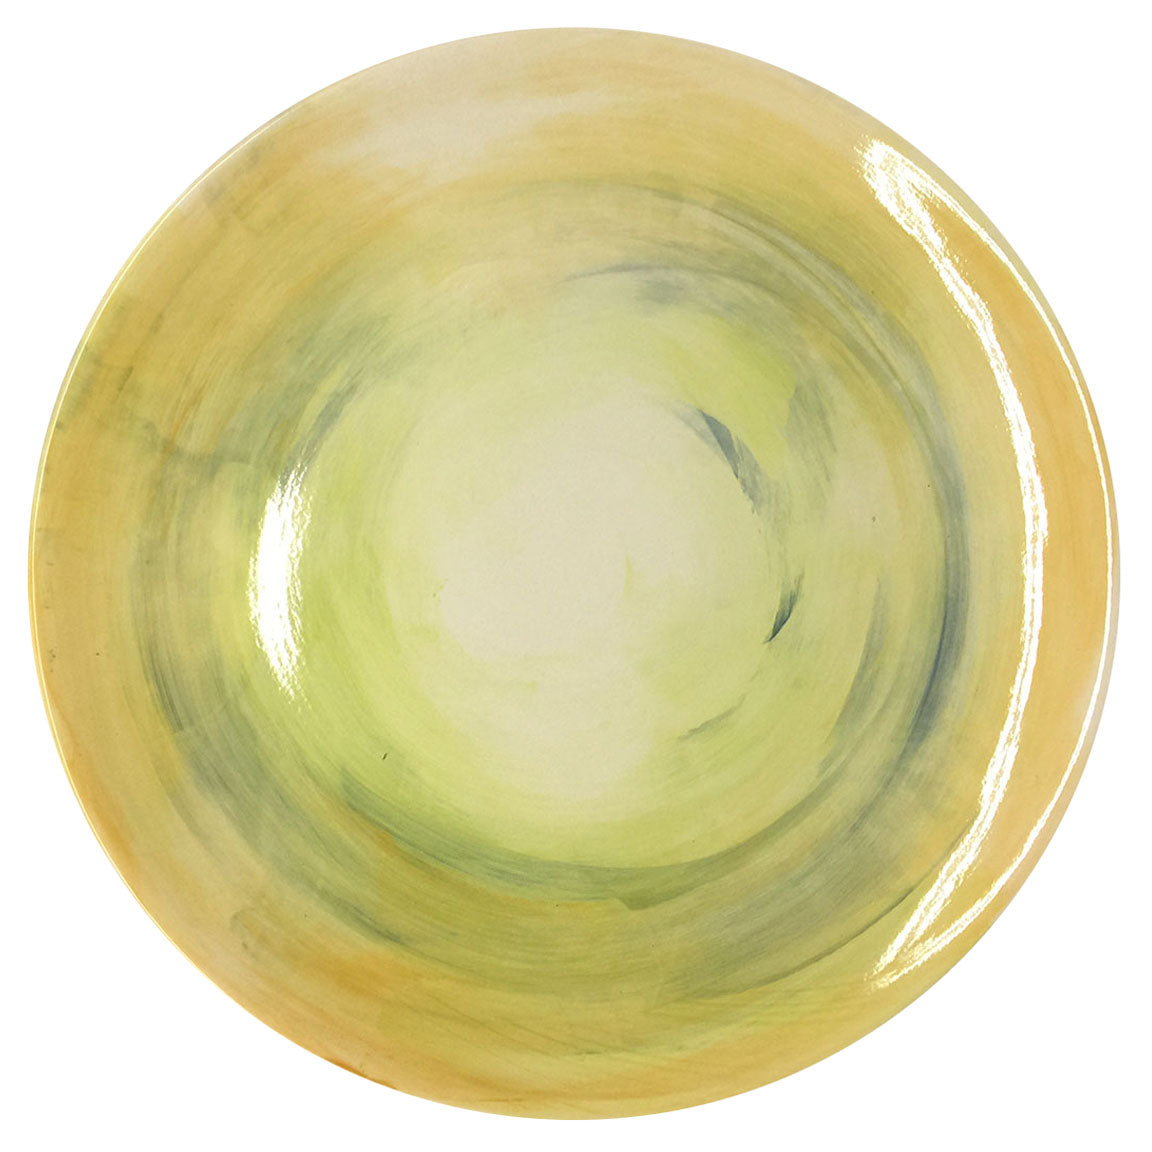 PLATTER #11 - CHARTREUSE, GOLD & BLUE - HAND-PAINTED EARTHENWARE